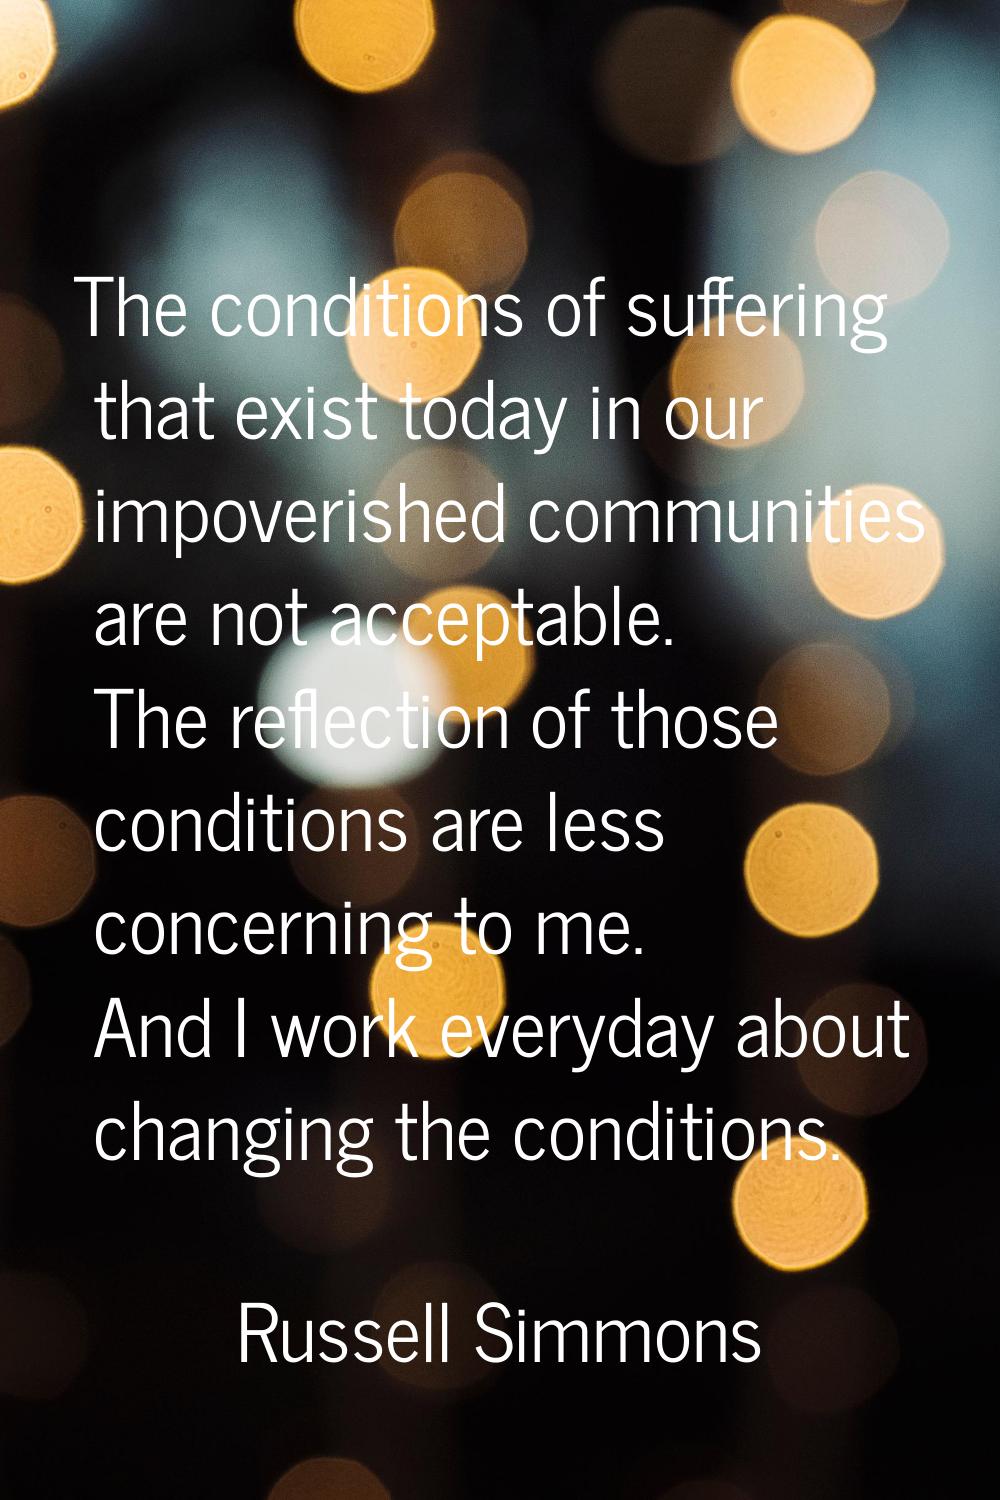 The conditions of suffering that exist today in our impoverished communities are not acceptable. Th